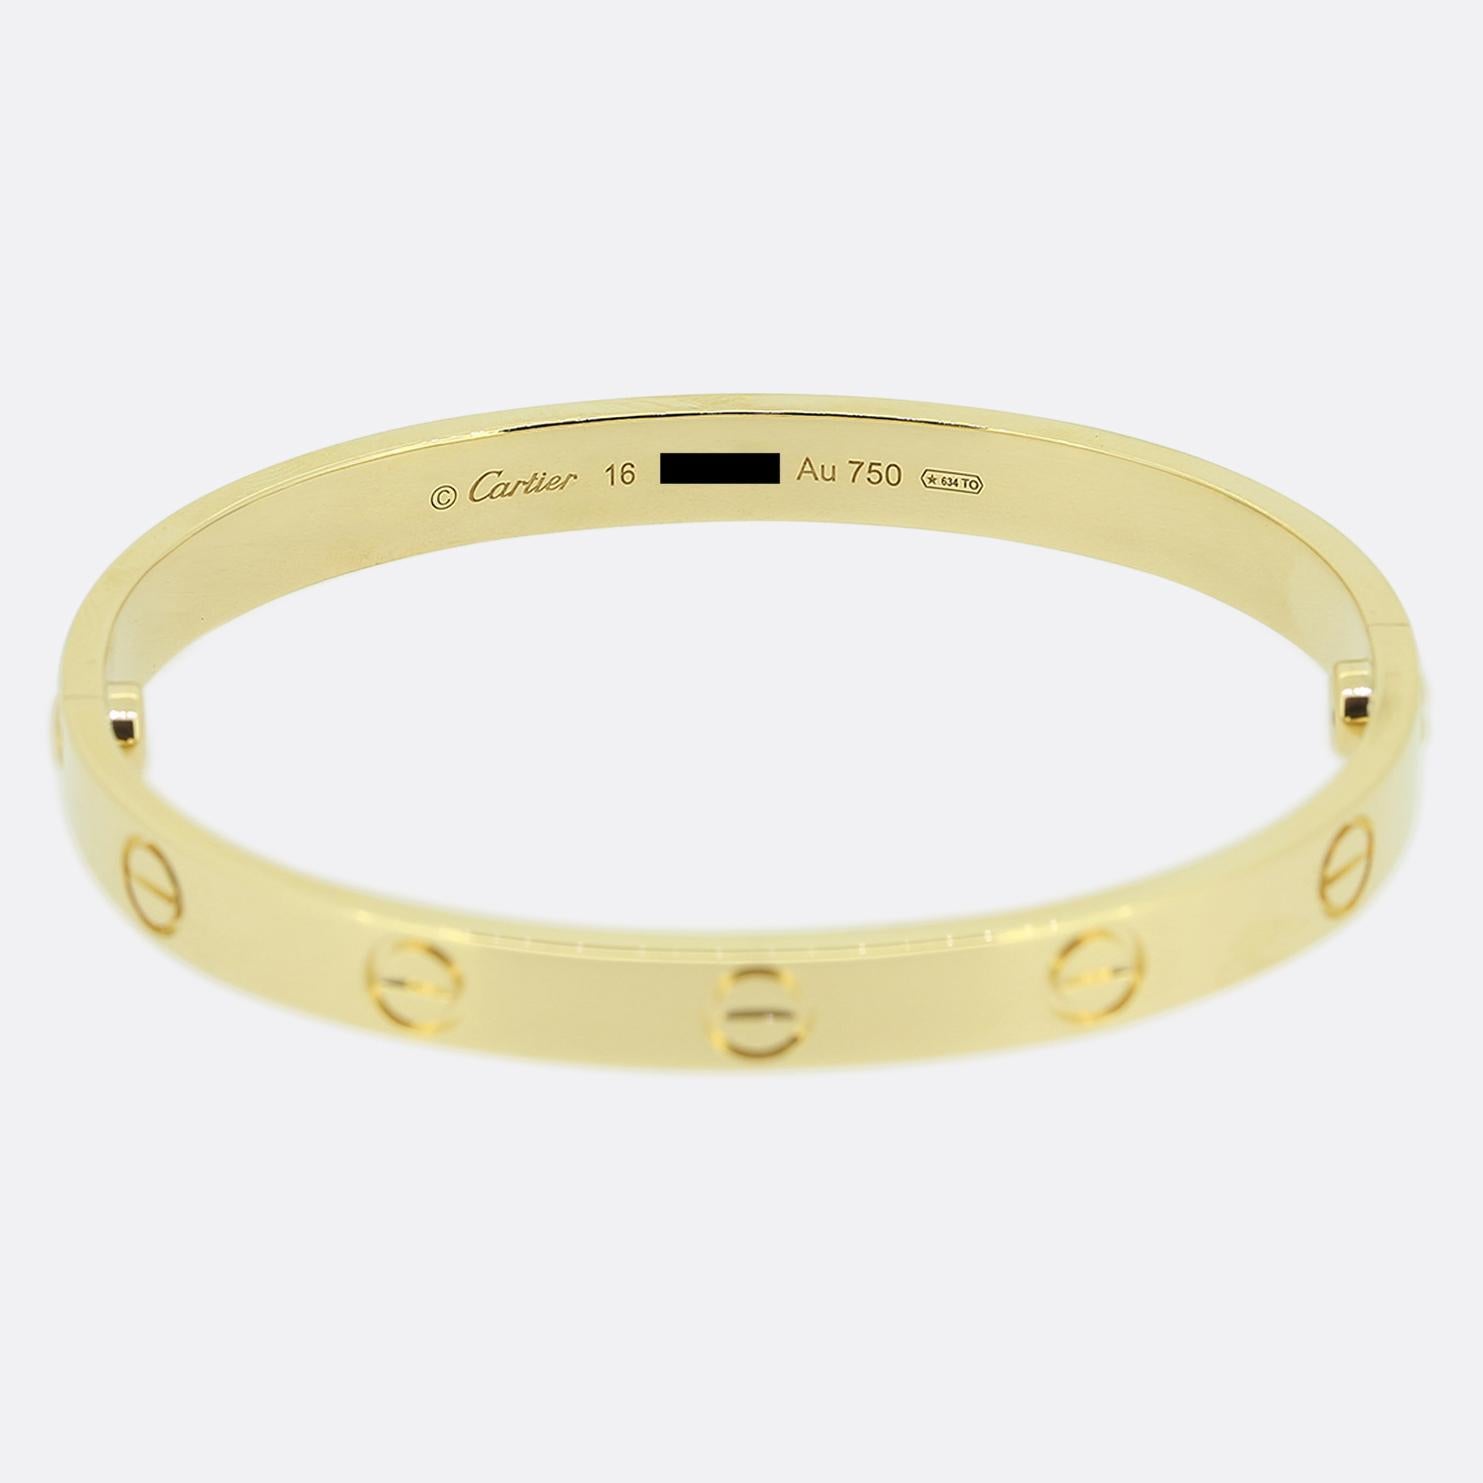 Cartier LOVE Bangle Size 16 In Good Condition For Sale In London, GB